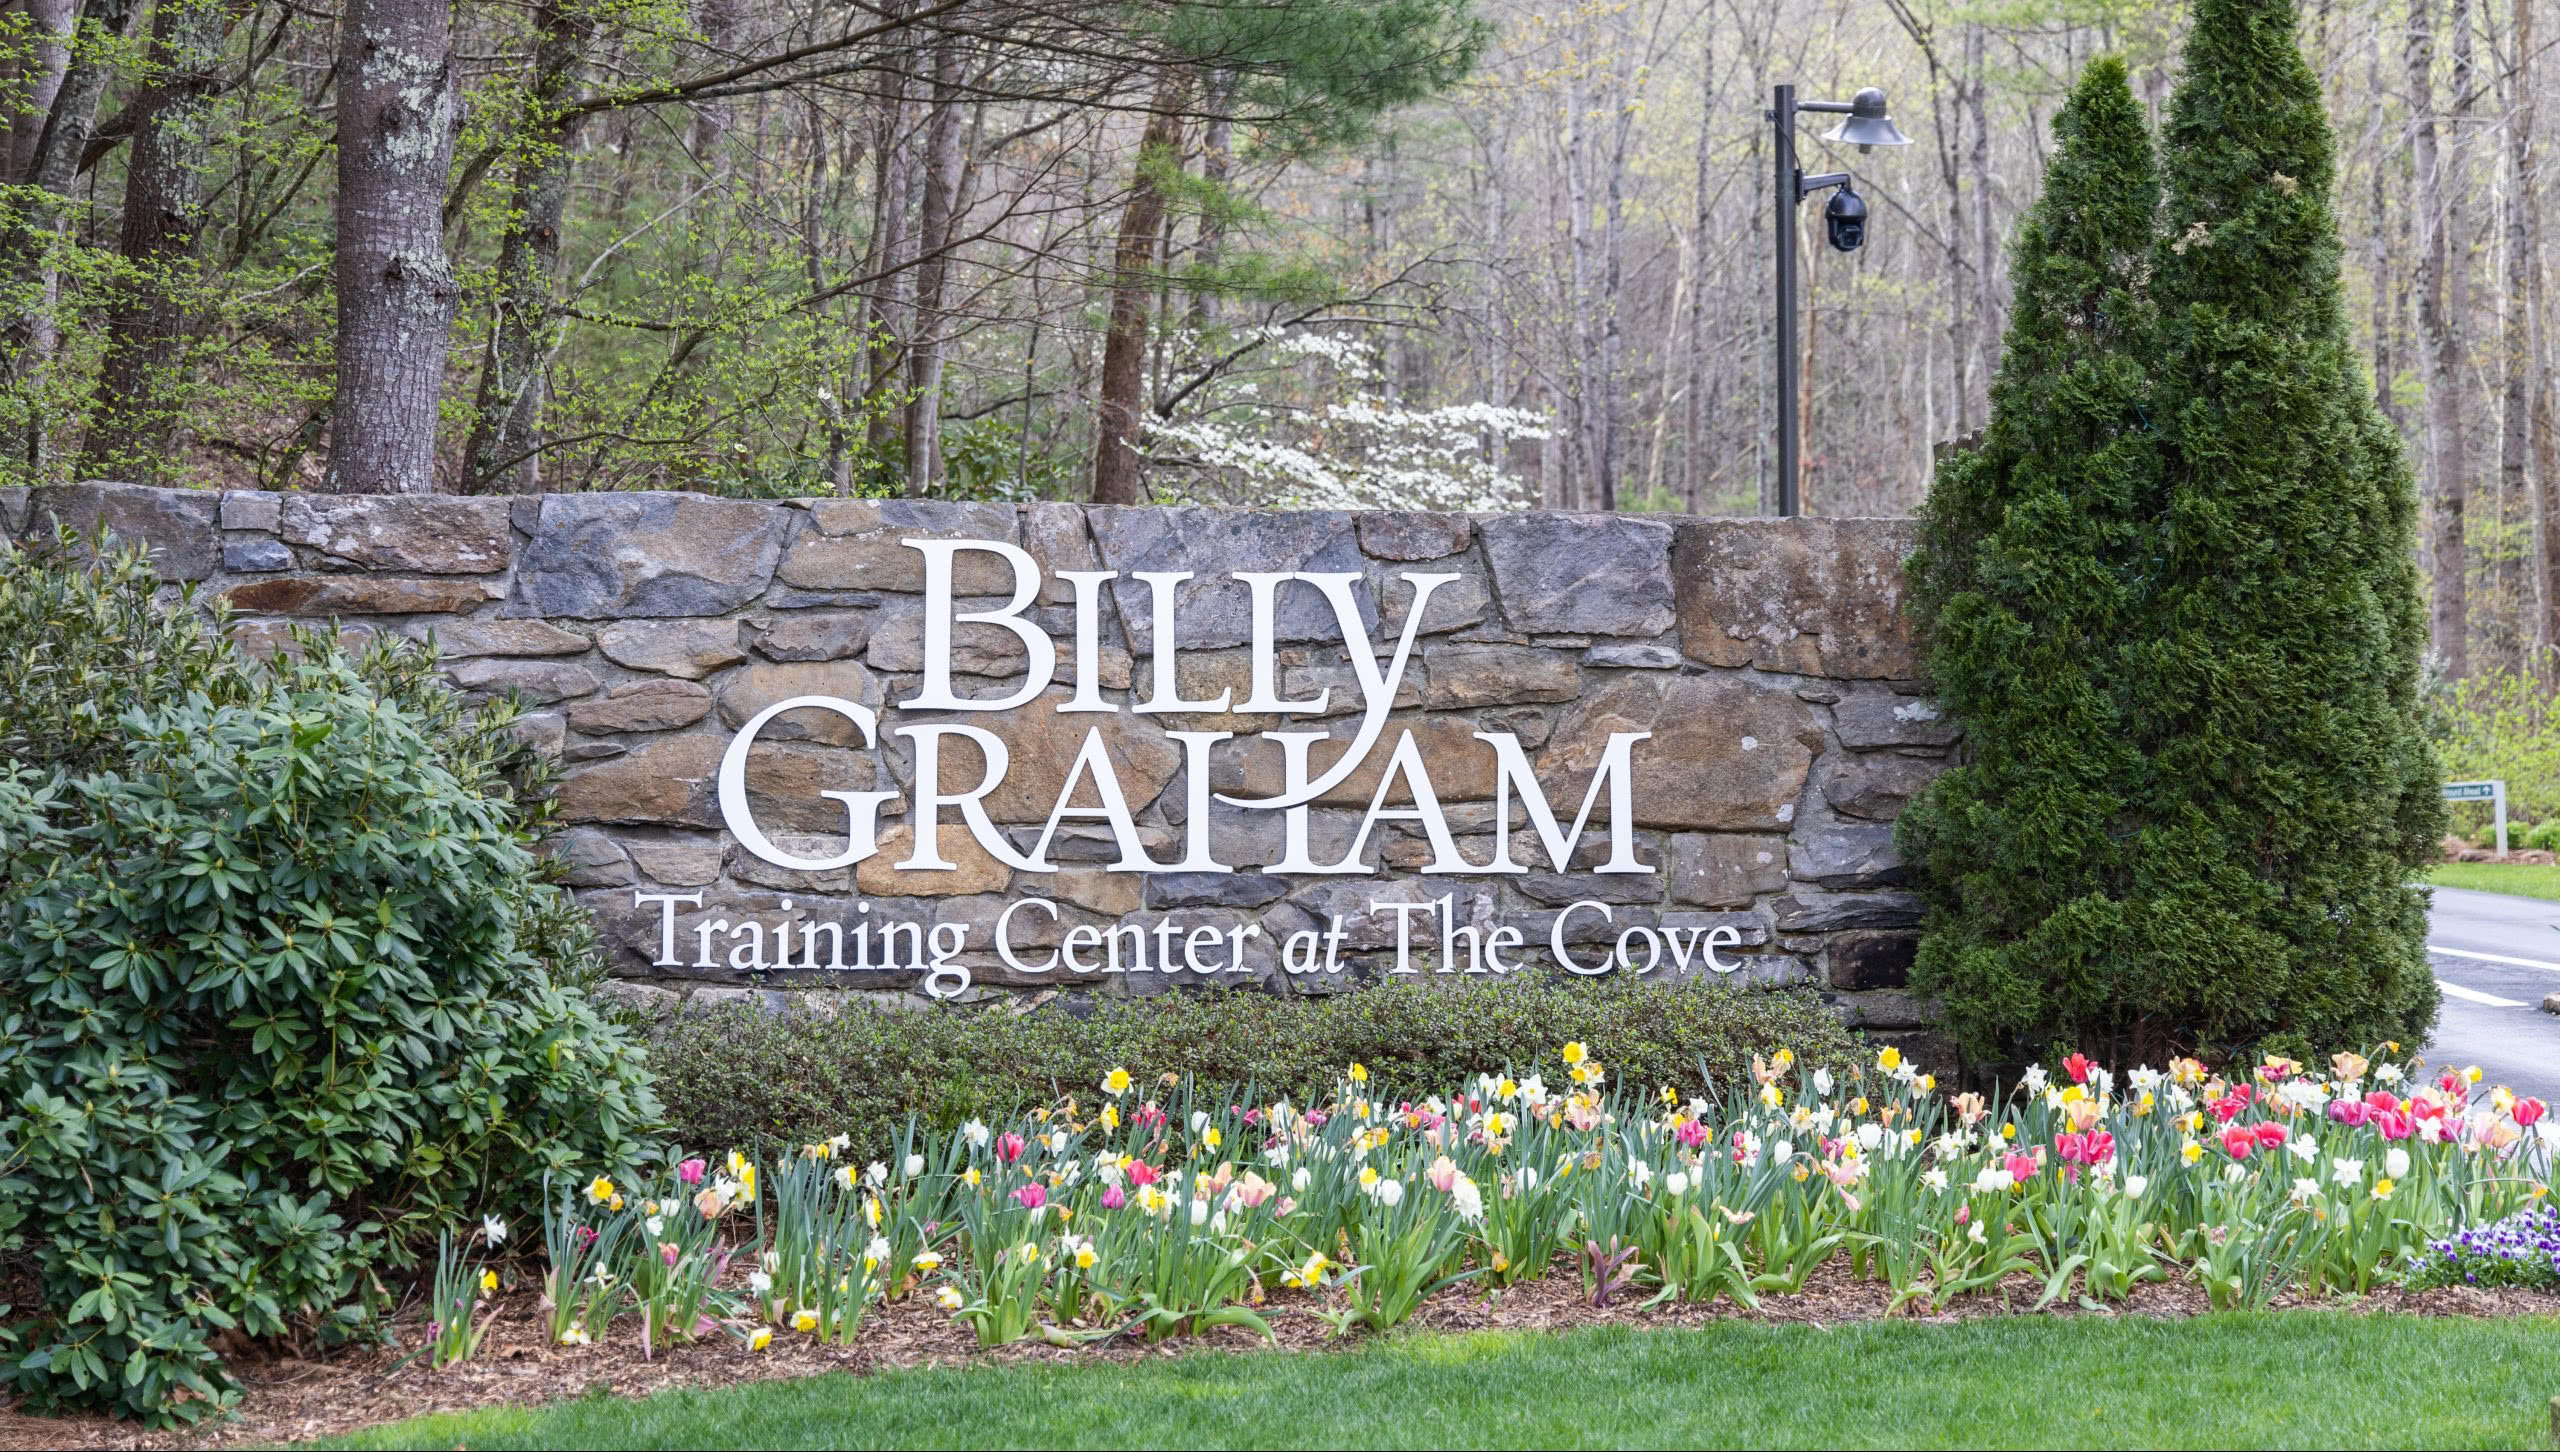 On July 28-30, The Billy Graham Training Center at The Cove in Asheville, will welcome Hispanic Christians for a Spanish-language seminar.